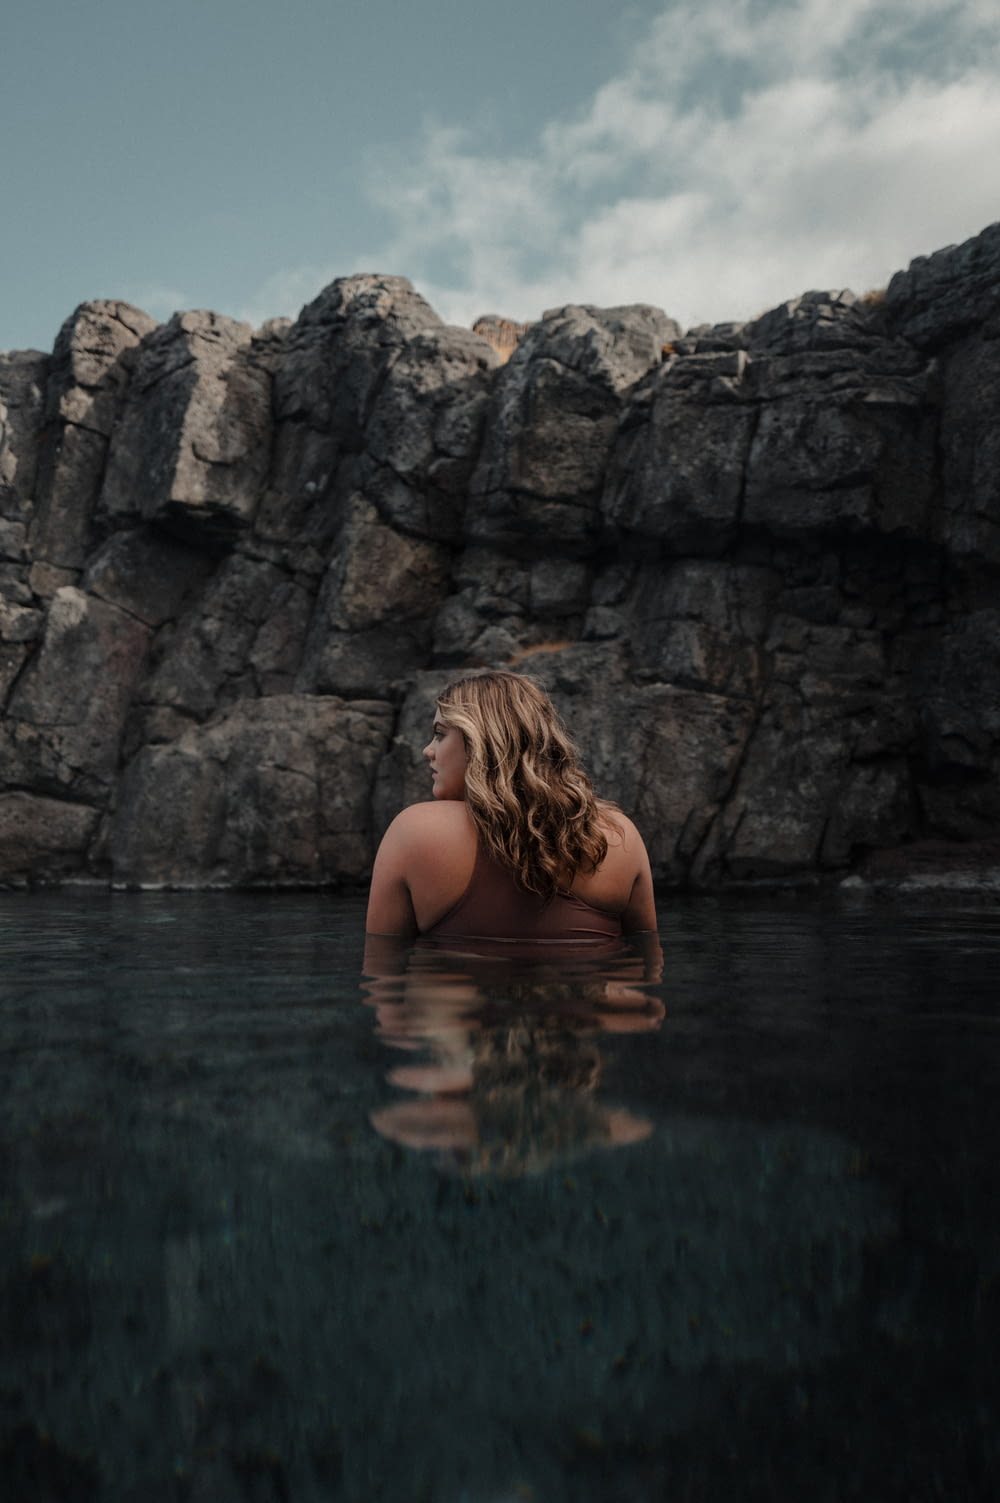 a woman in a body of water with rocks in the background